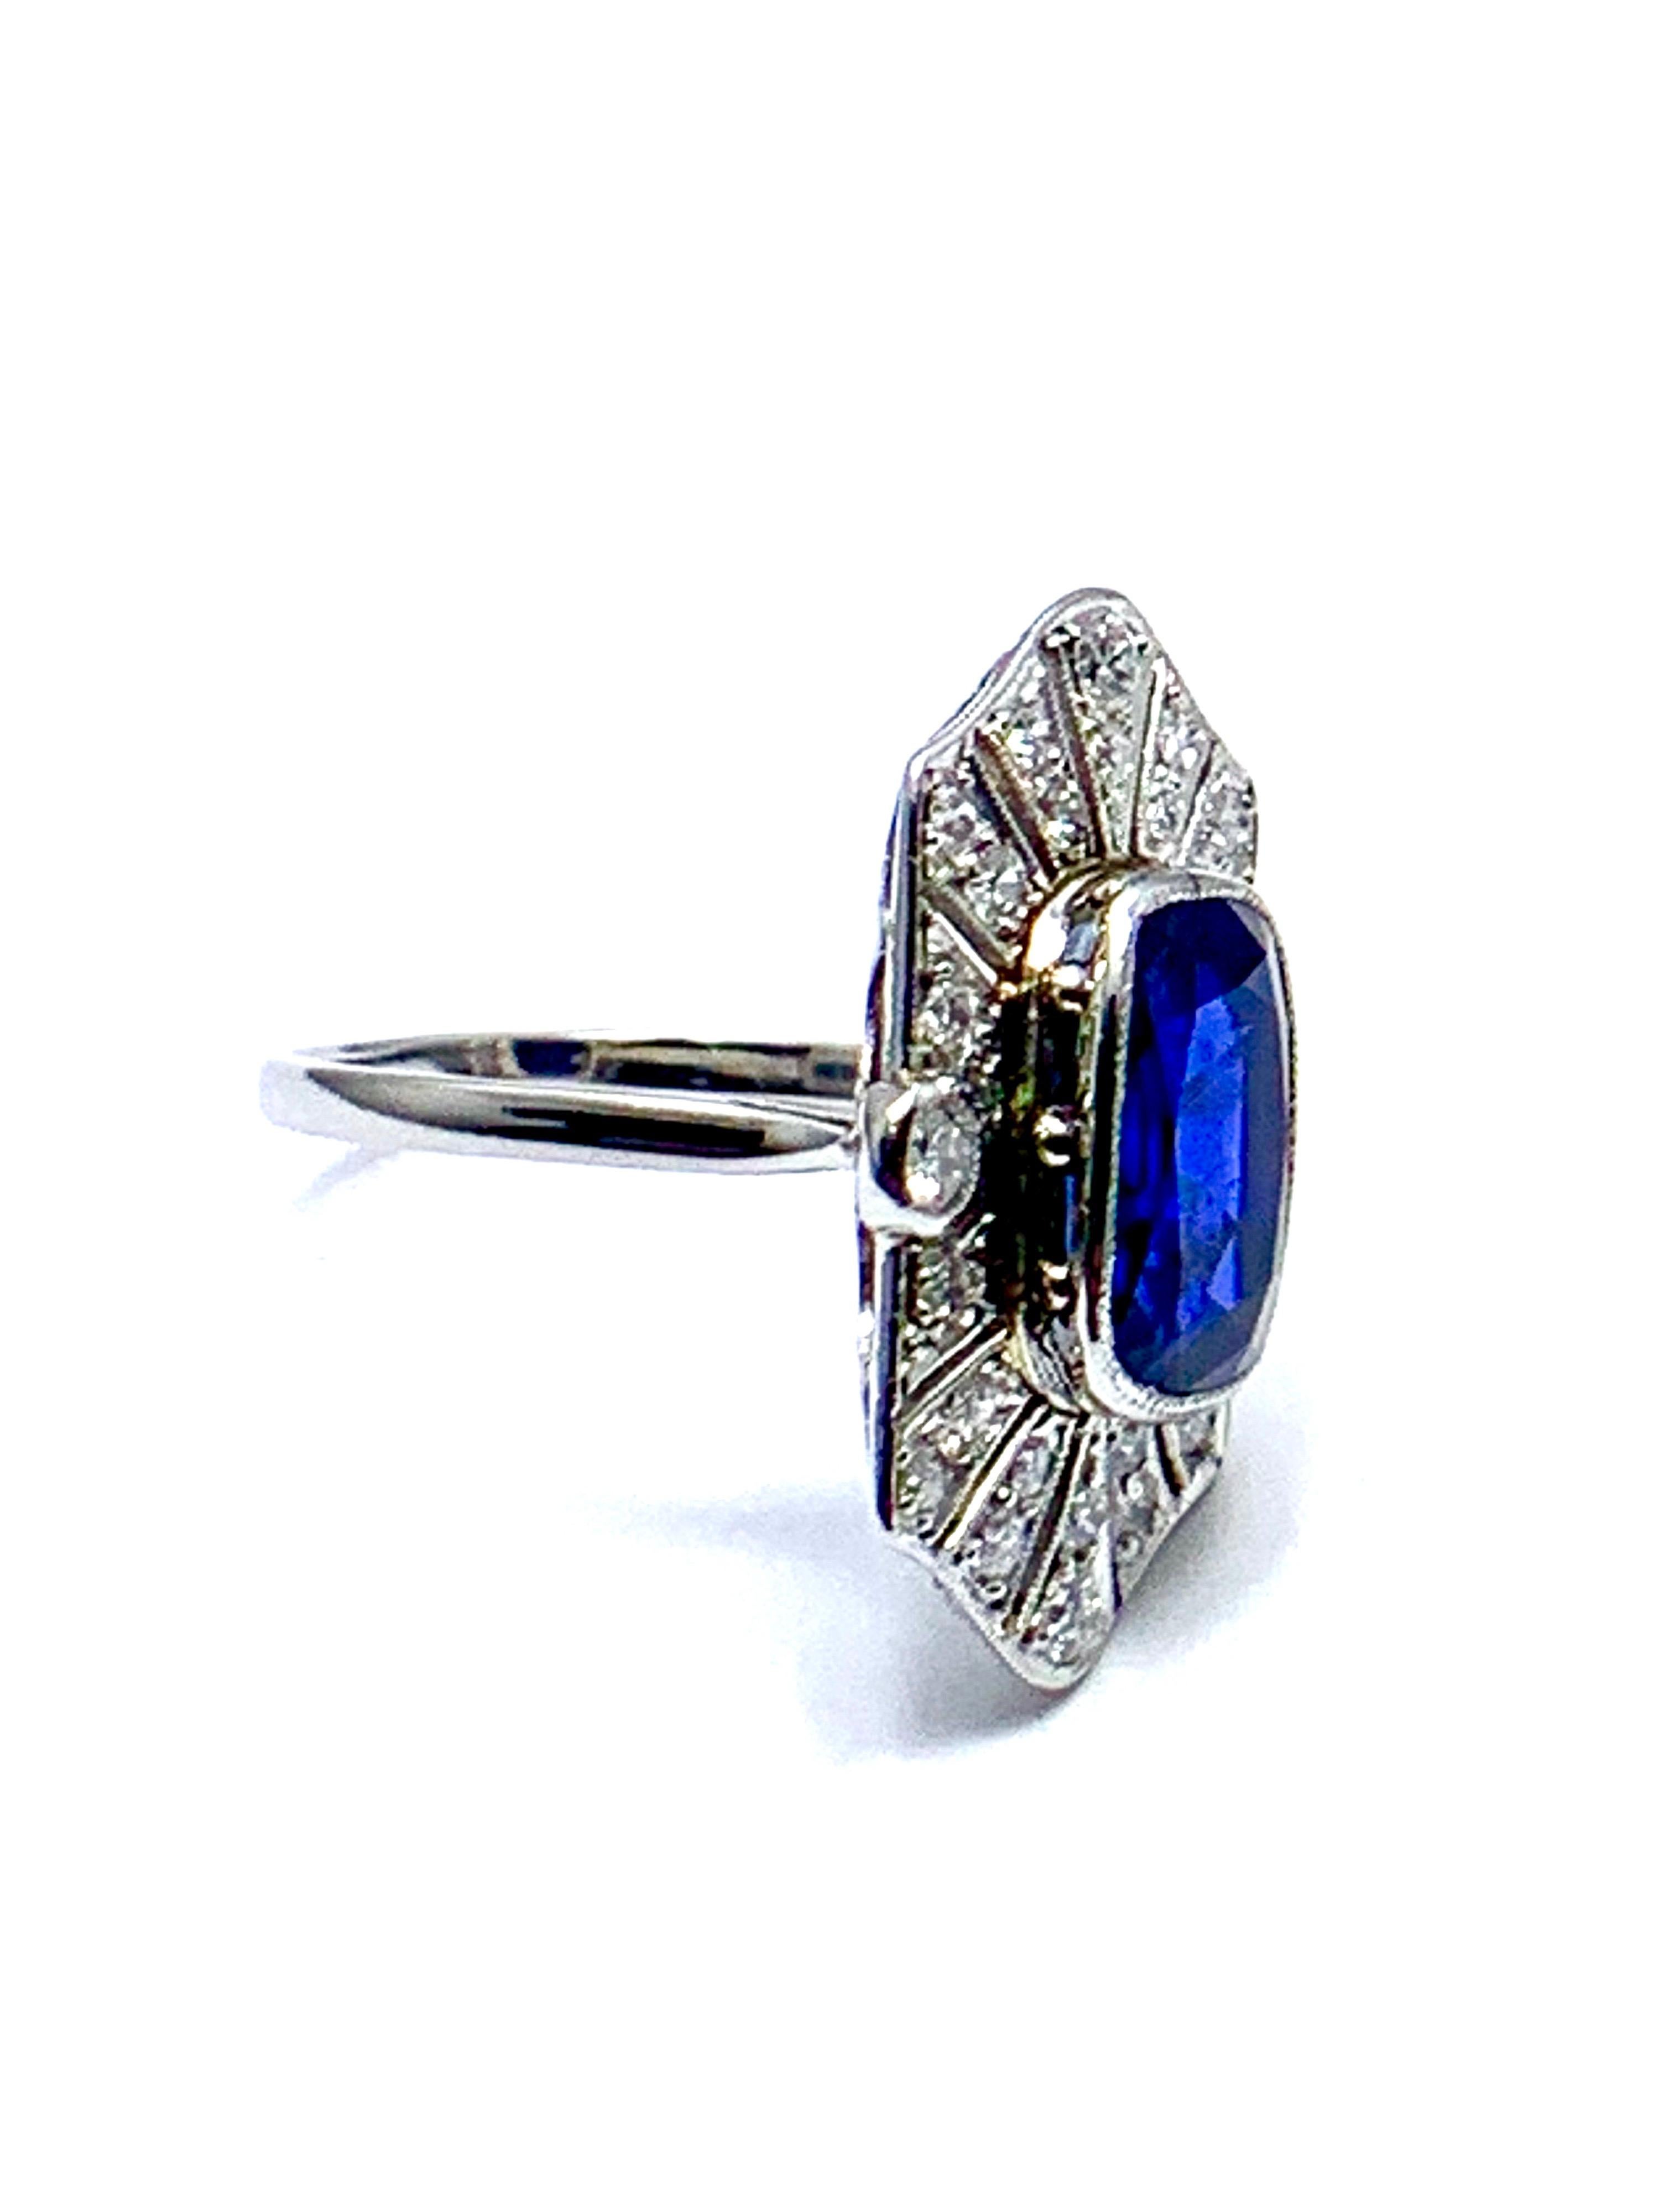 Women's or Men's Art Deco Style 4.76 Carat Cushion Shaped Sapphire and Diamond and Platinum Ring